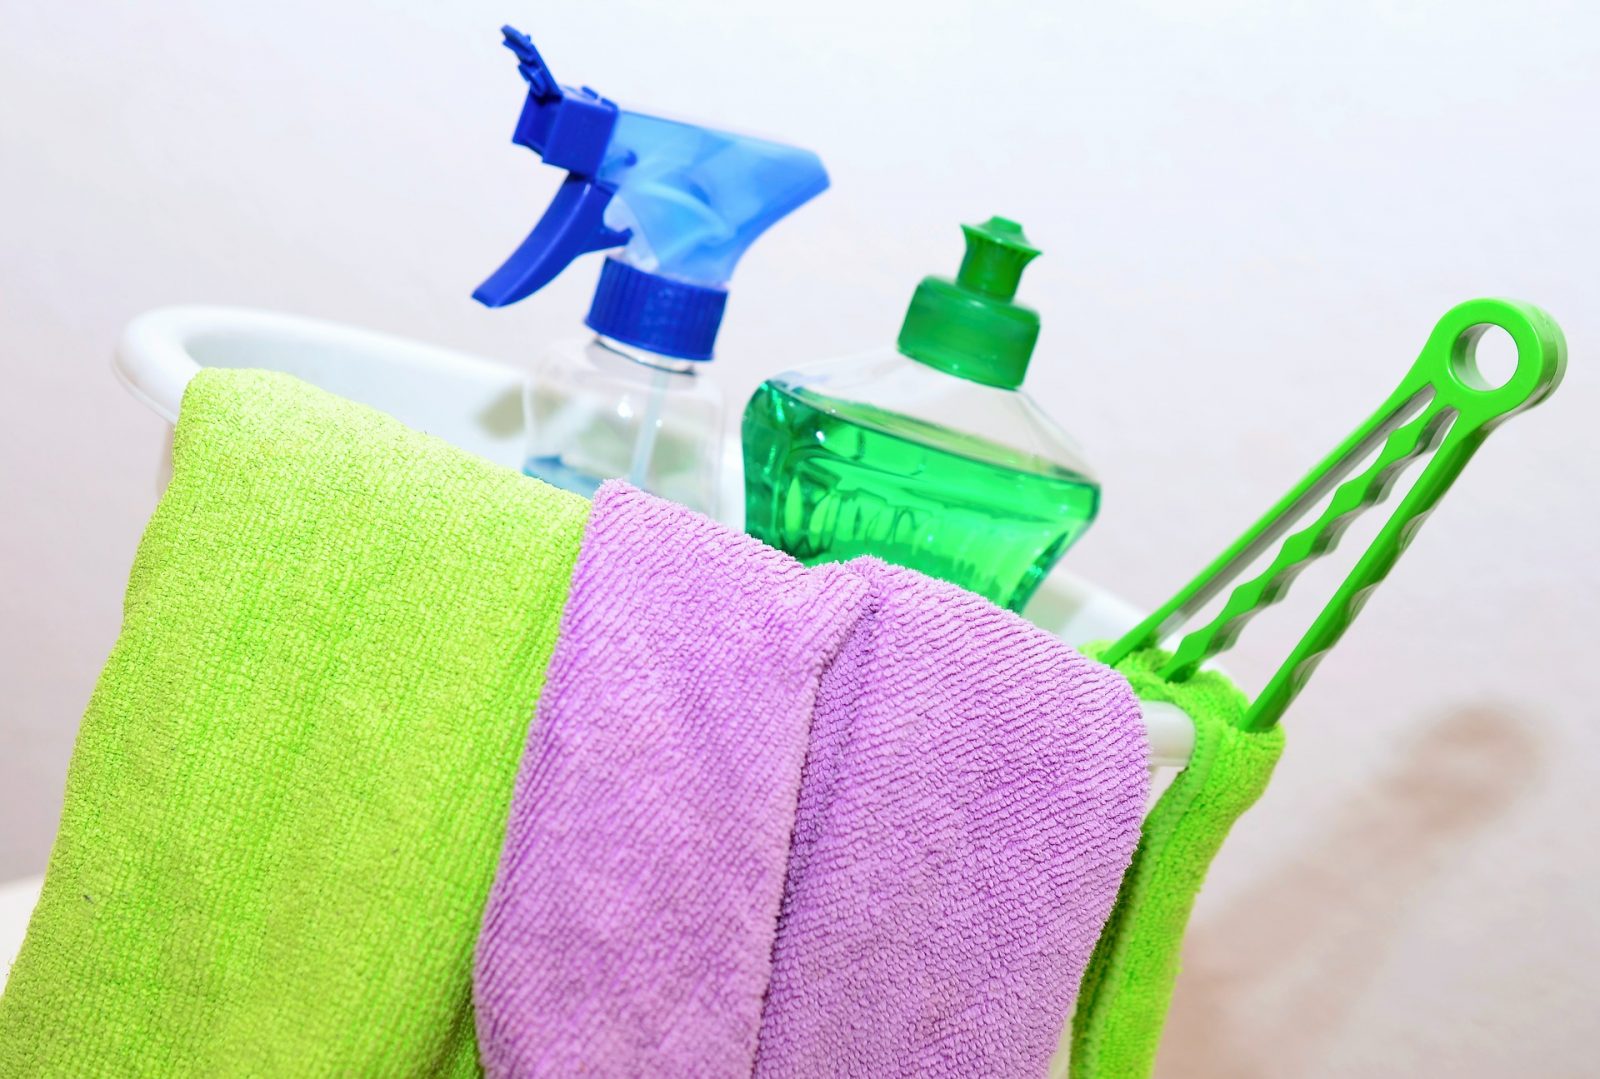 32 Brilliant Cleaning Microfiber Cloth Uses Cleaning #Microfiber #Cleaning #BudgetFriendly #Affordable #HouseCleaning #SaveMoney #SaveTime